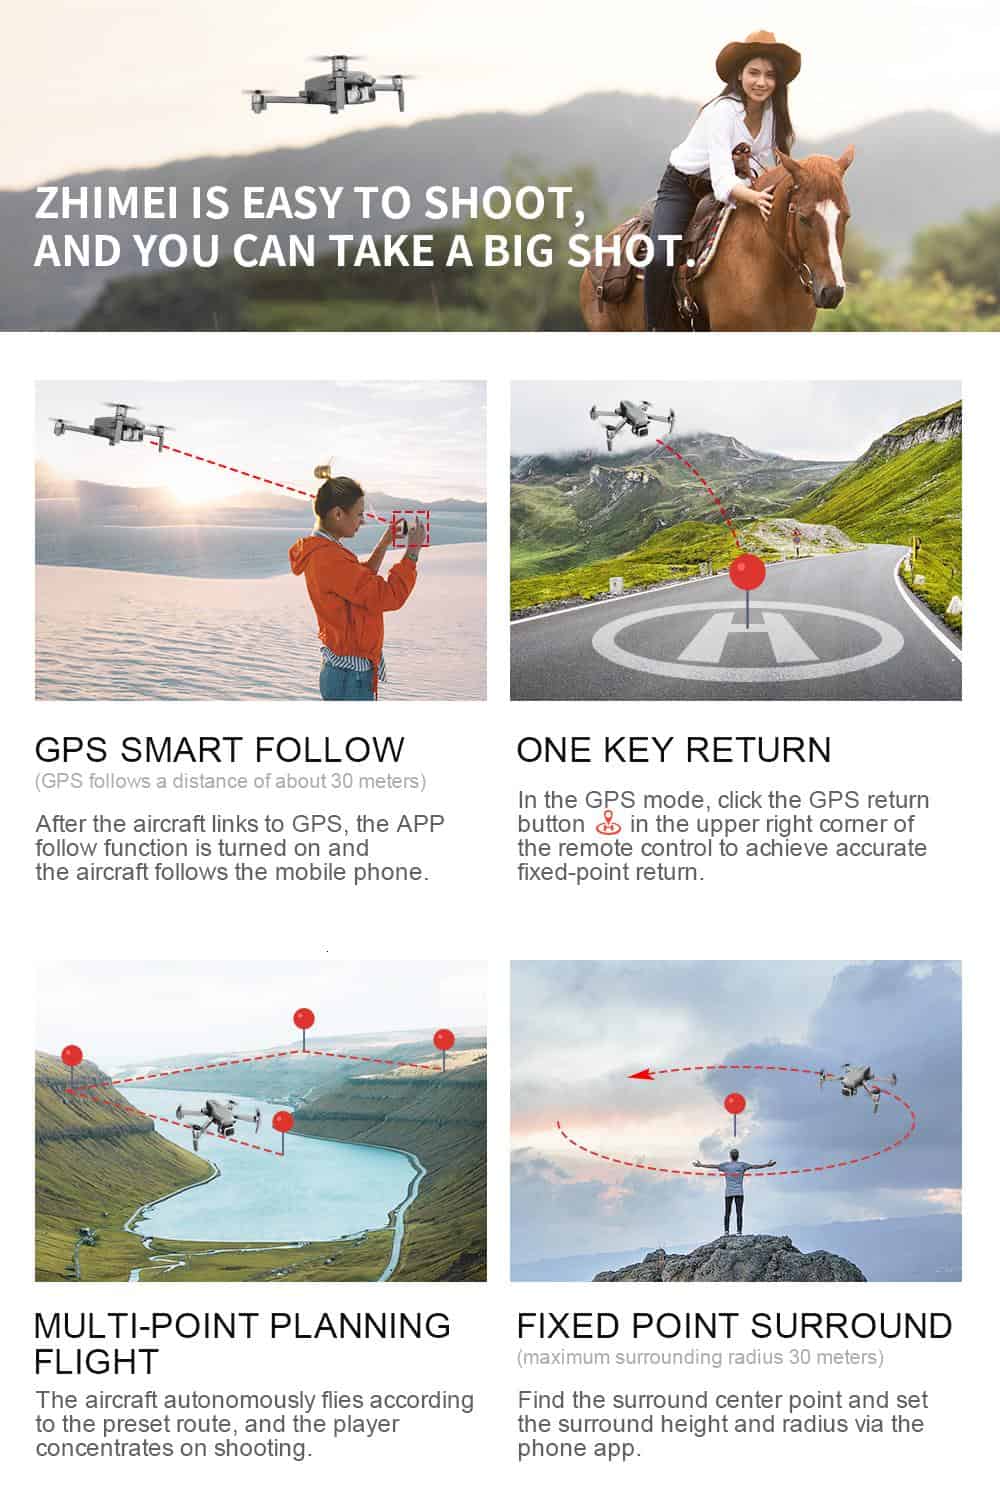 Profissional Drone With ESC 4K Camera 5G GPS WiFi FPV Brushless Control Distance 1000m RC Helicopter Quadrocopter